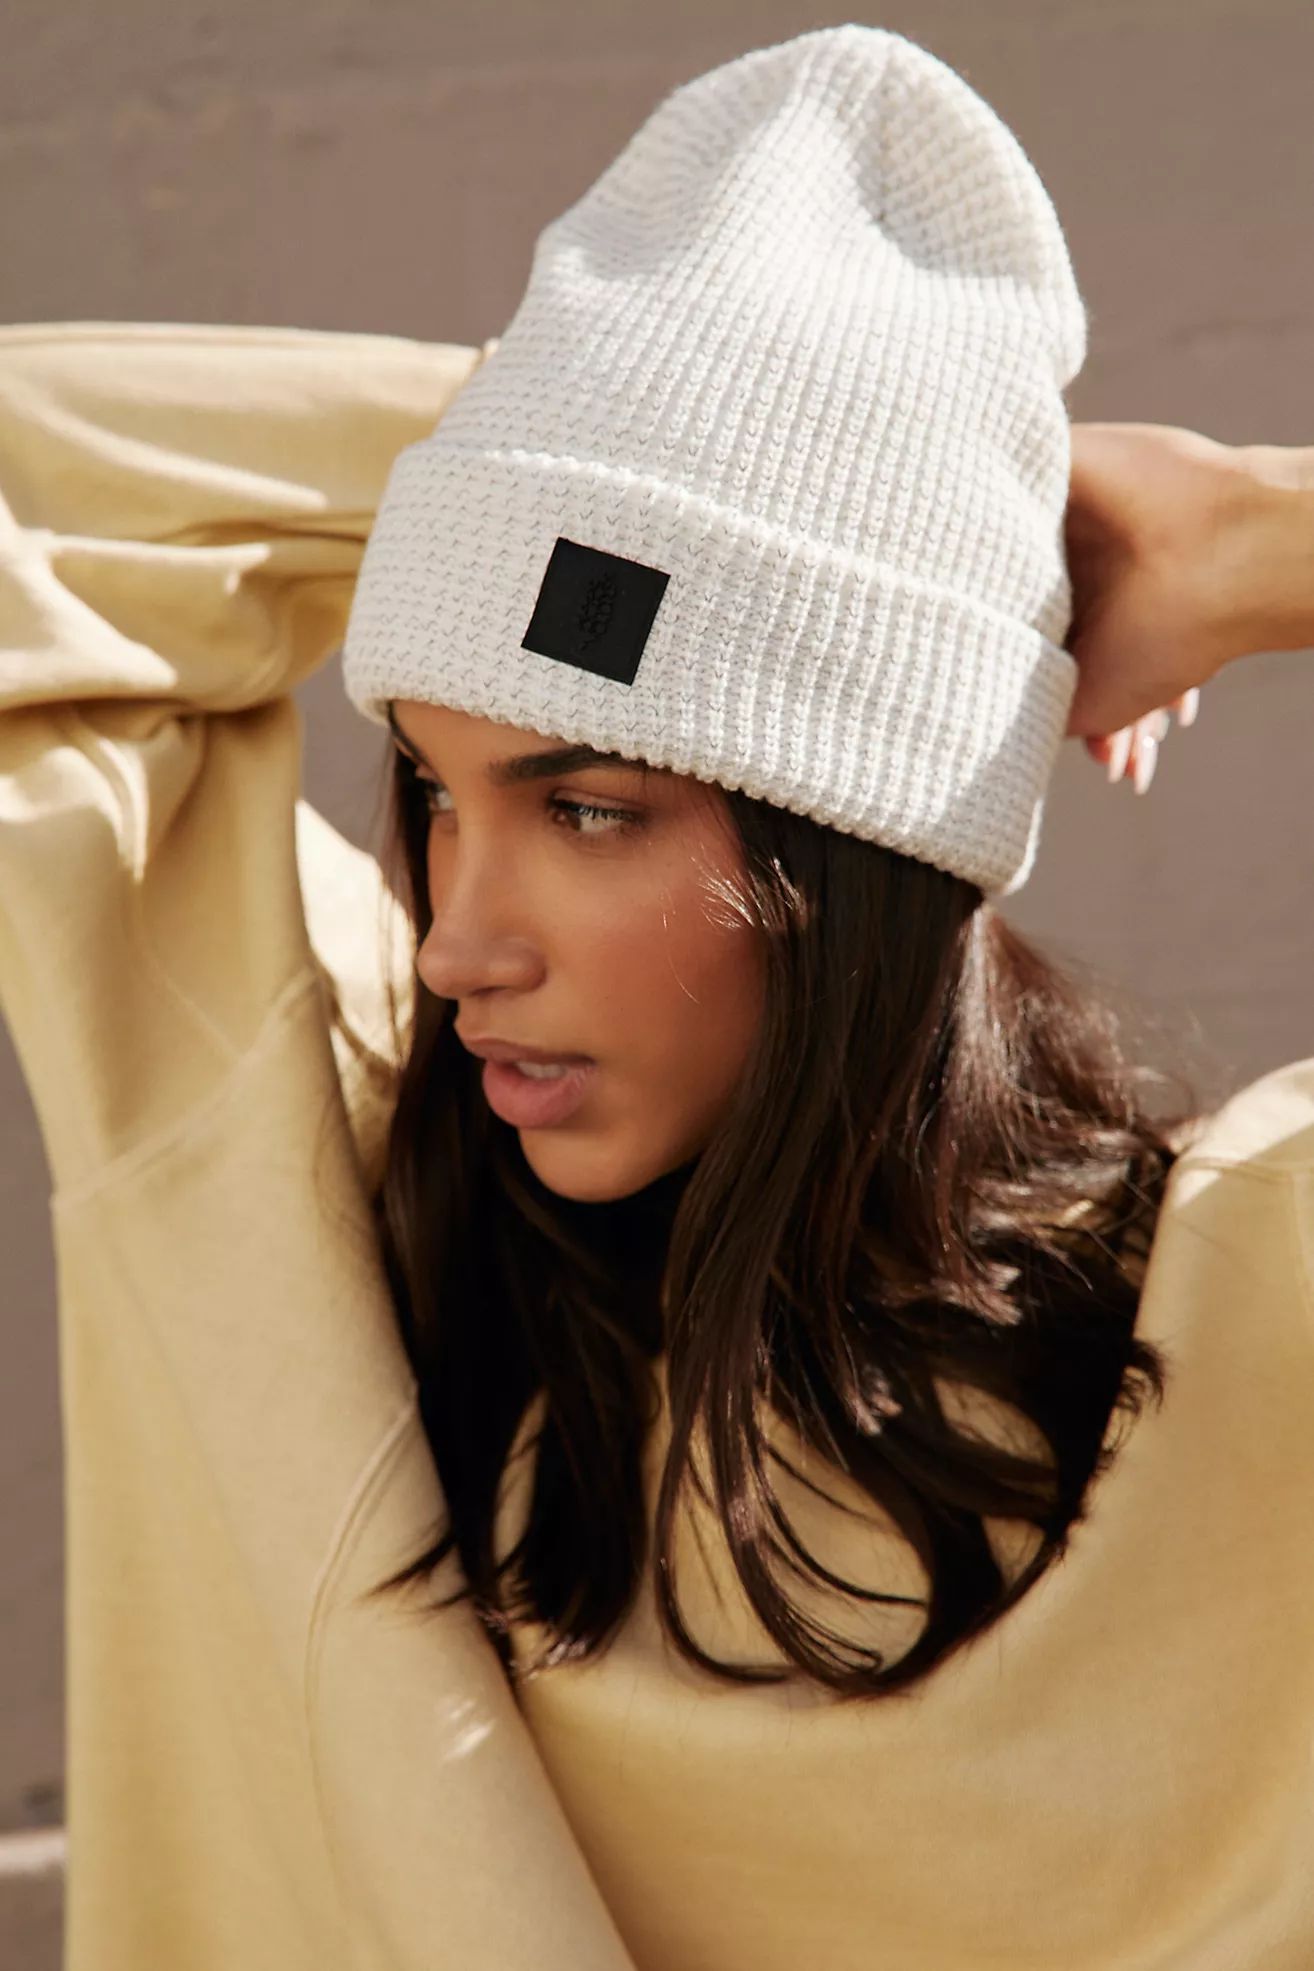 Let's Race Fleece Lined Recycled Yarn Beanie | Free People (Global - UK&FR Excluded)